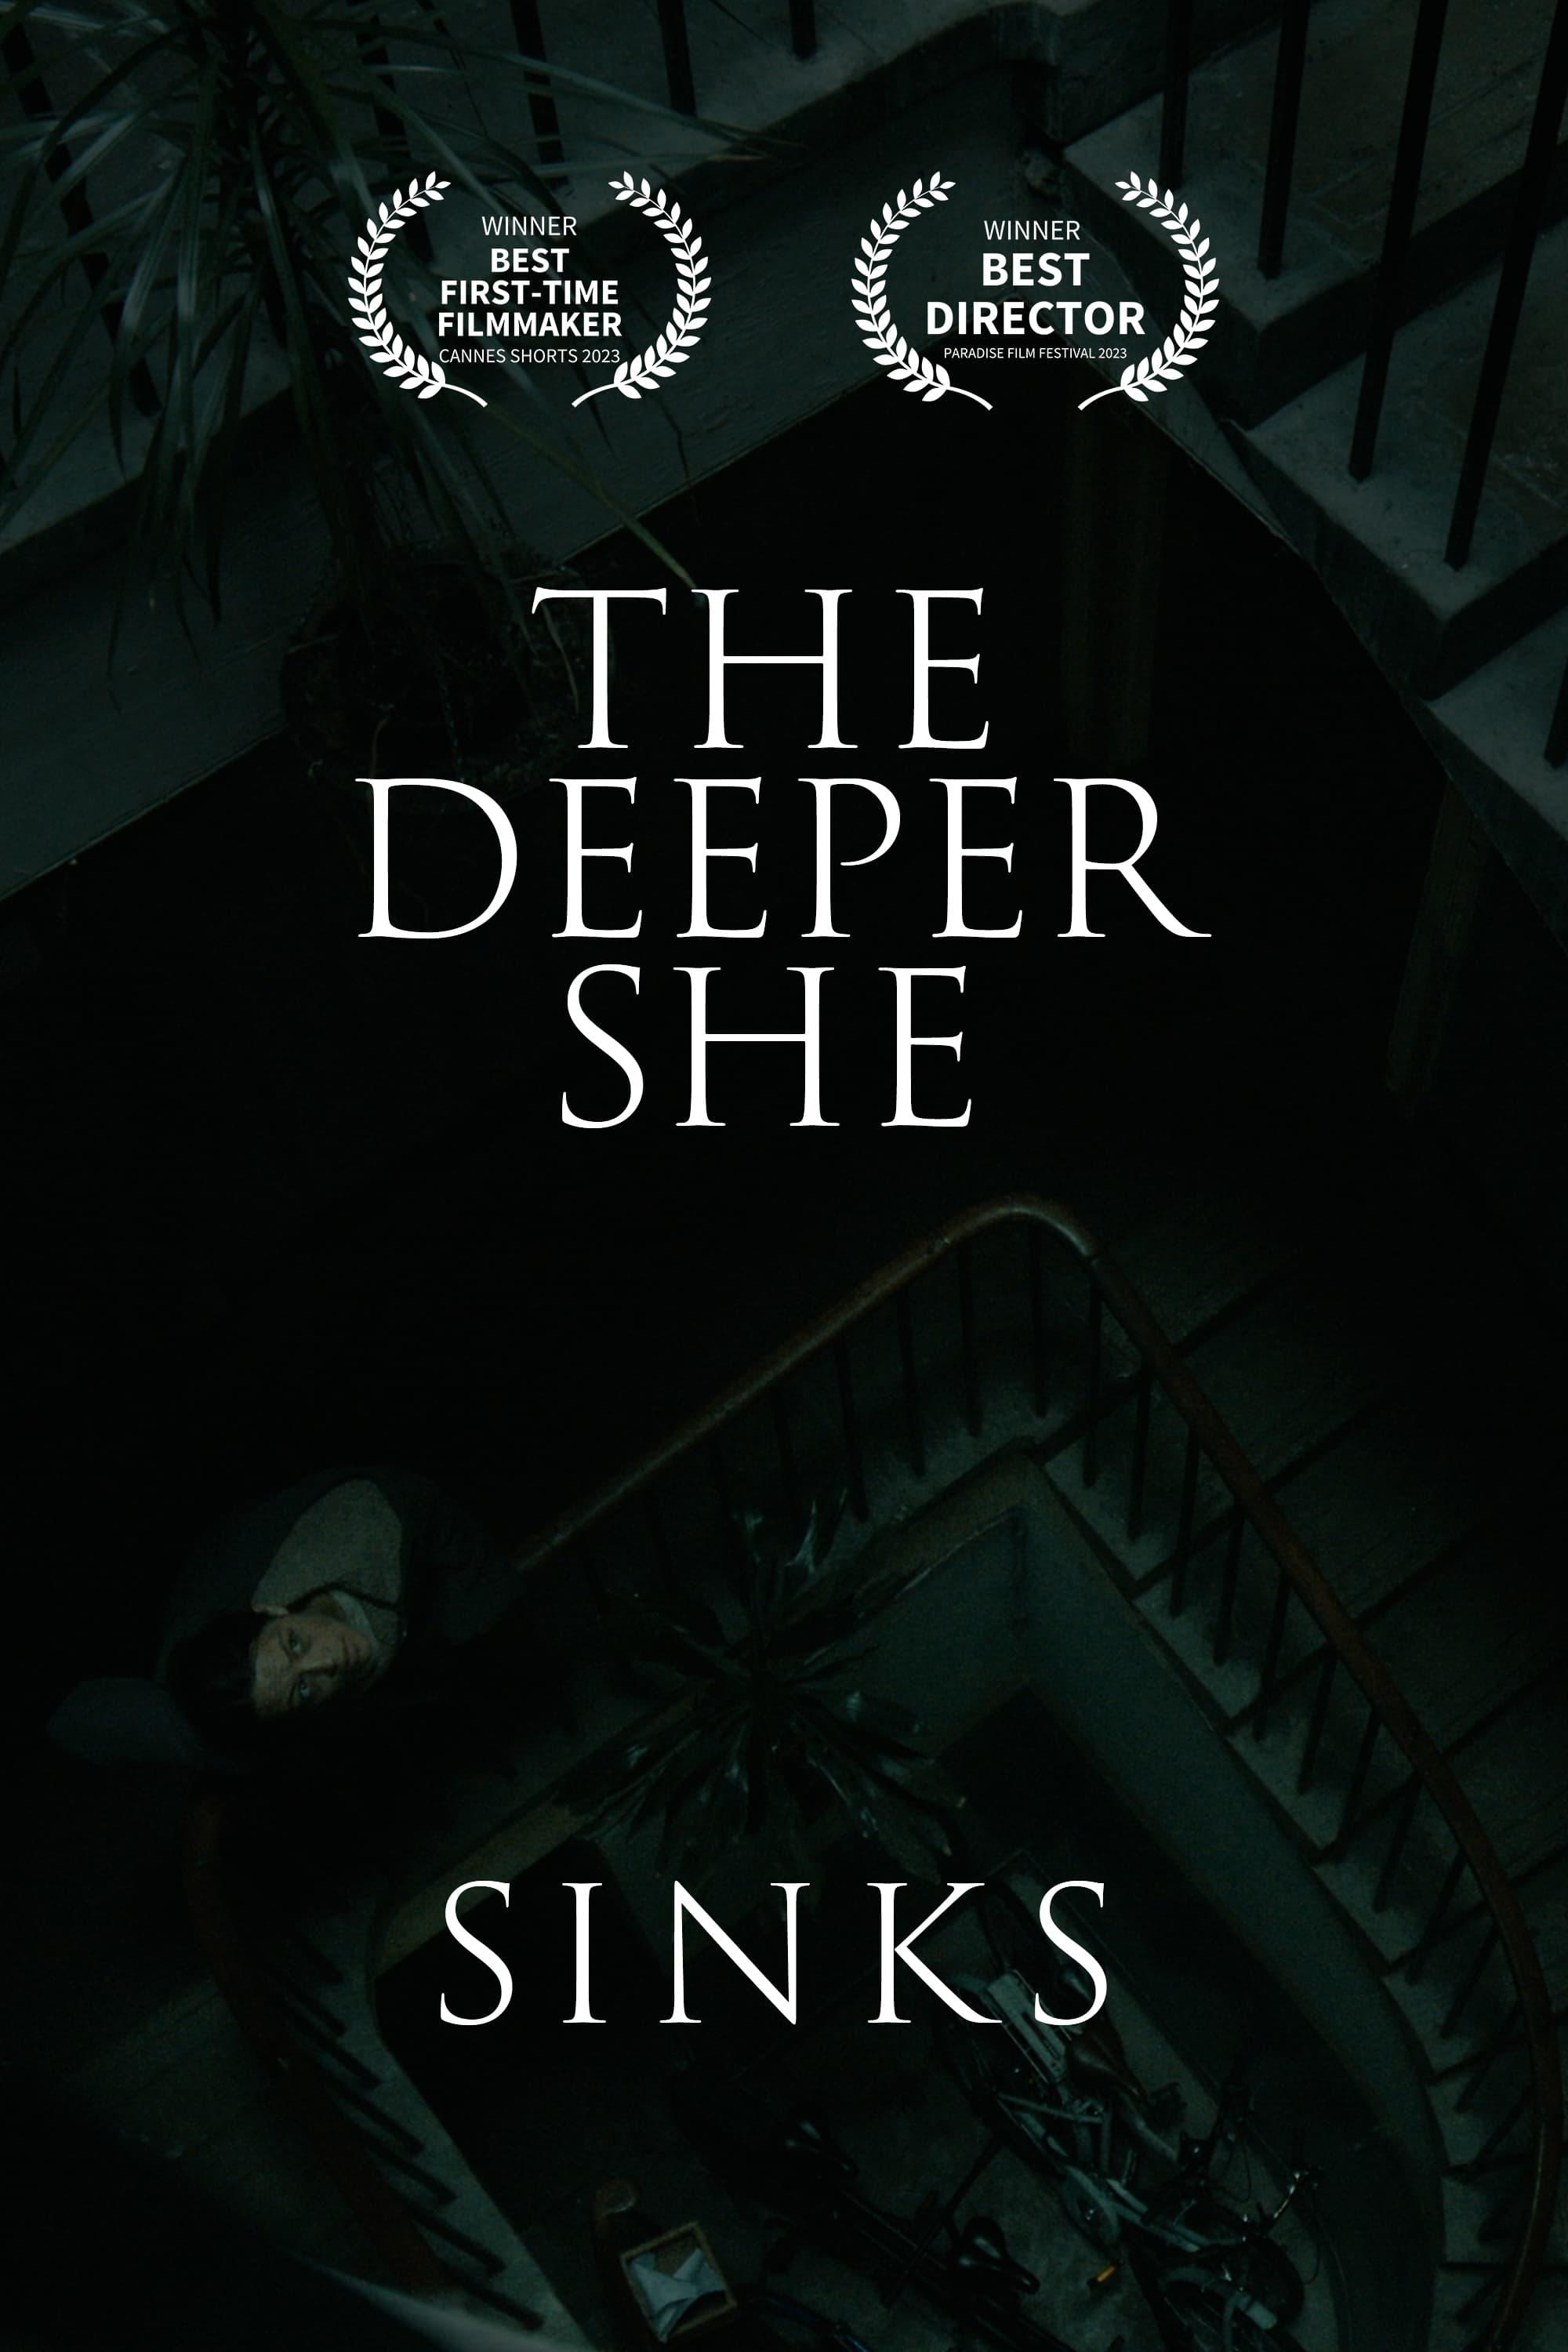 The Deeper She Sinks poster